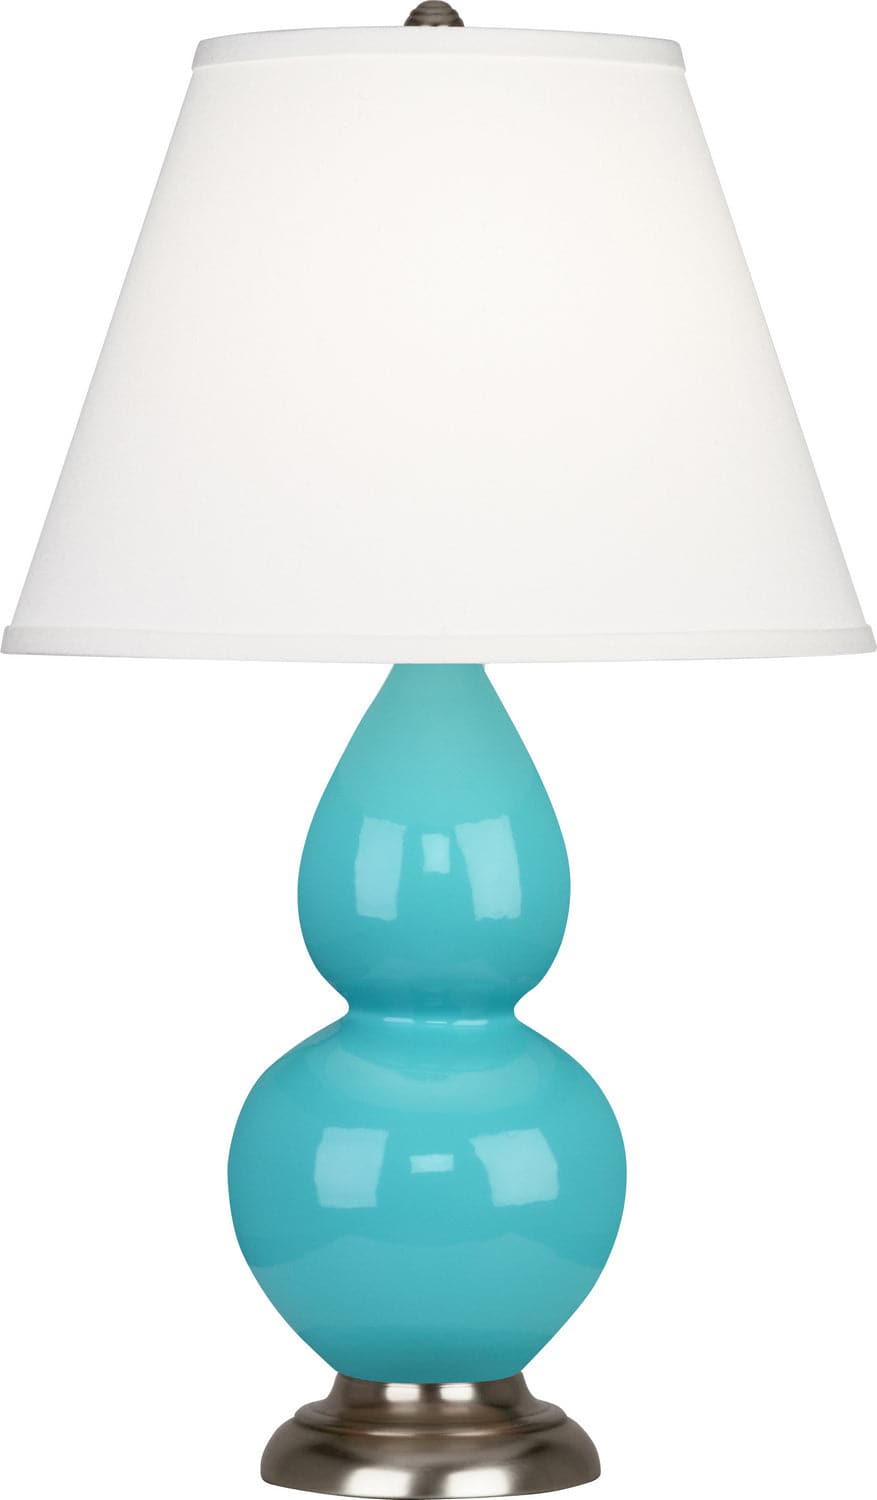 Robert Abbey - 1761X - One Light Accent Lamp - Small Double Gourd - Egg Blue Glazed w/Antique Silver